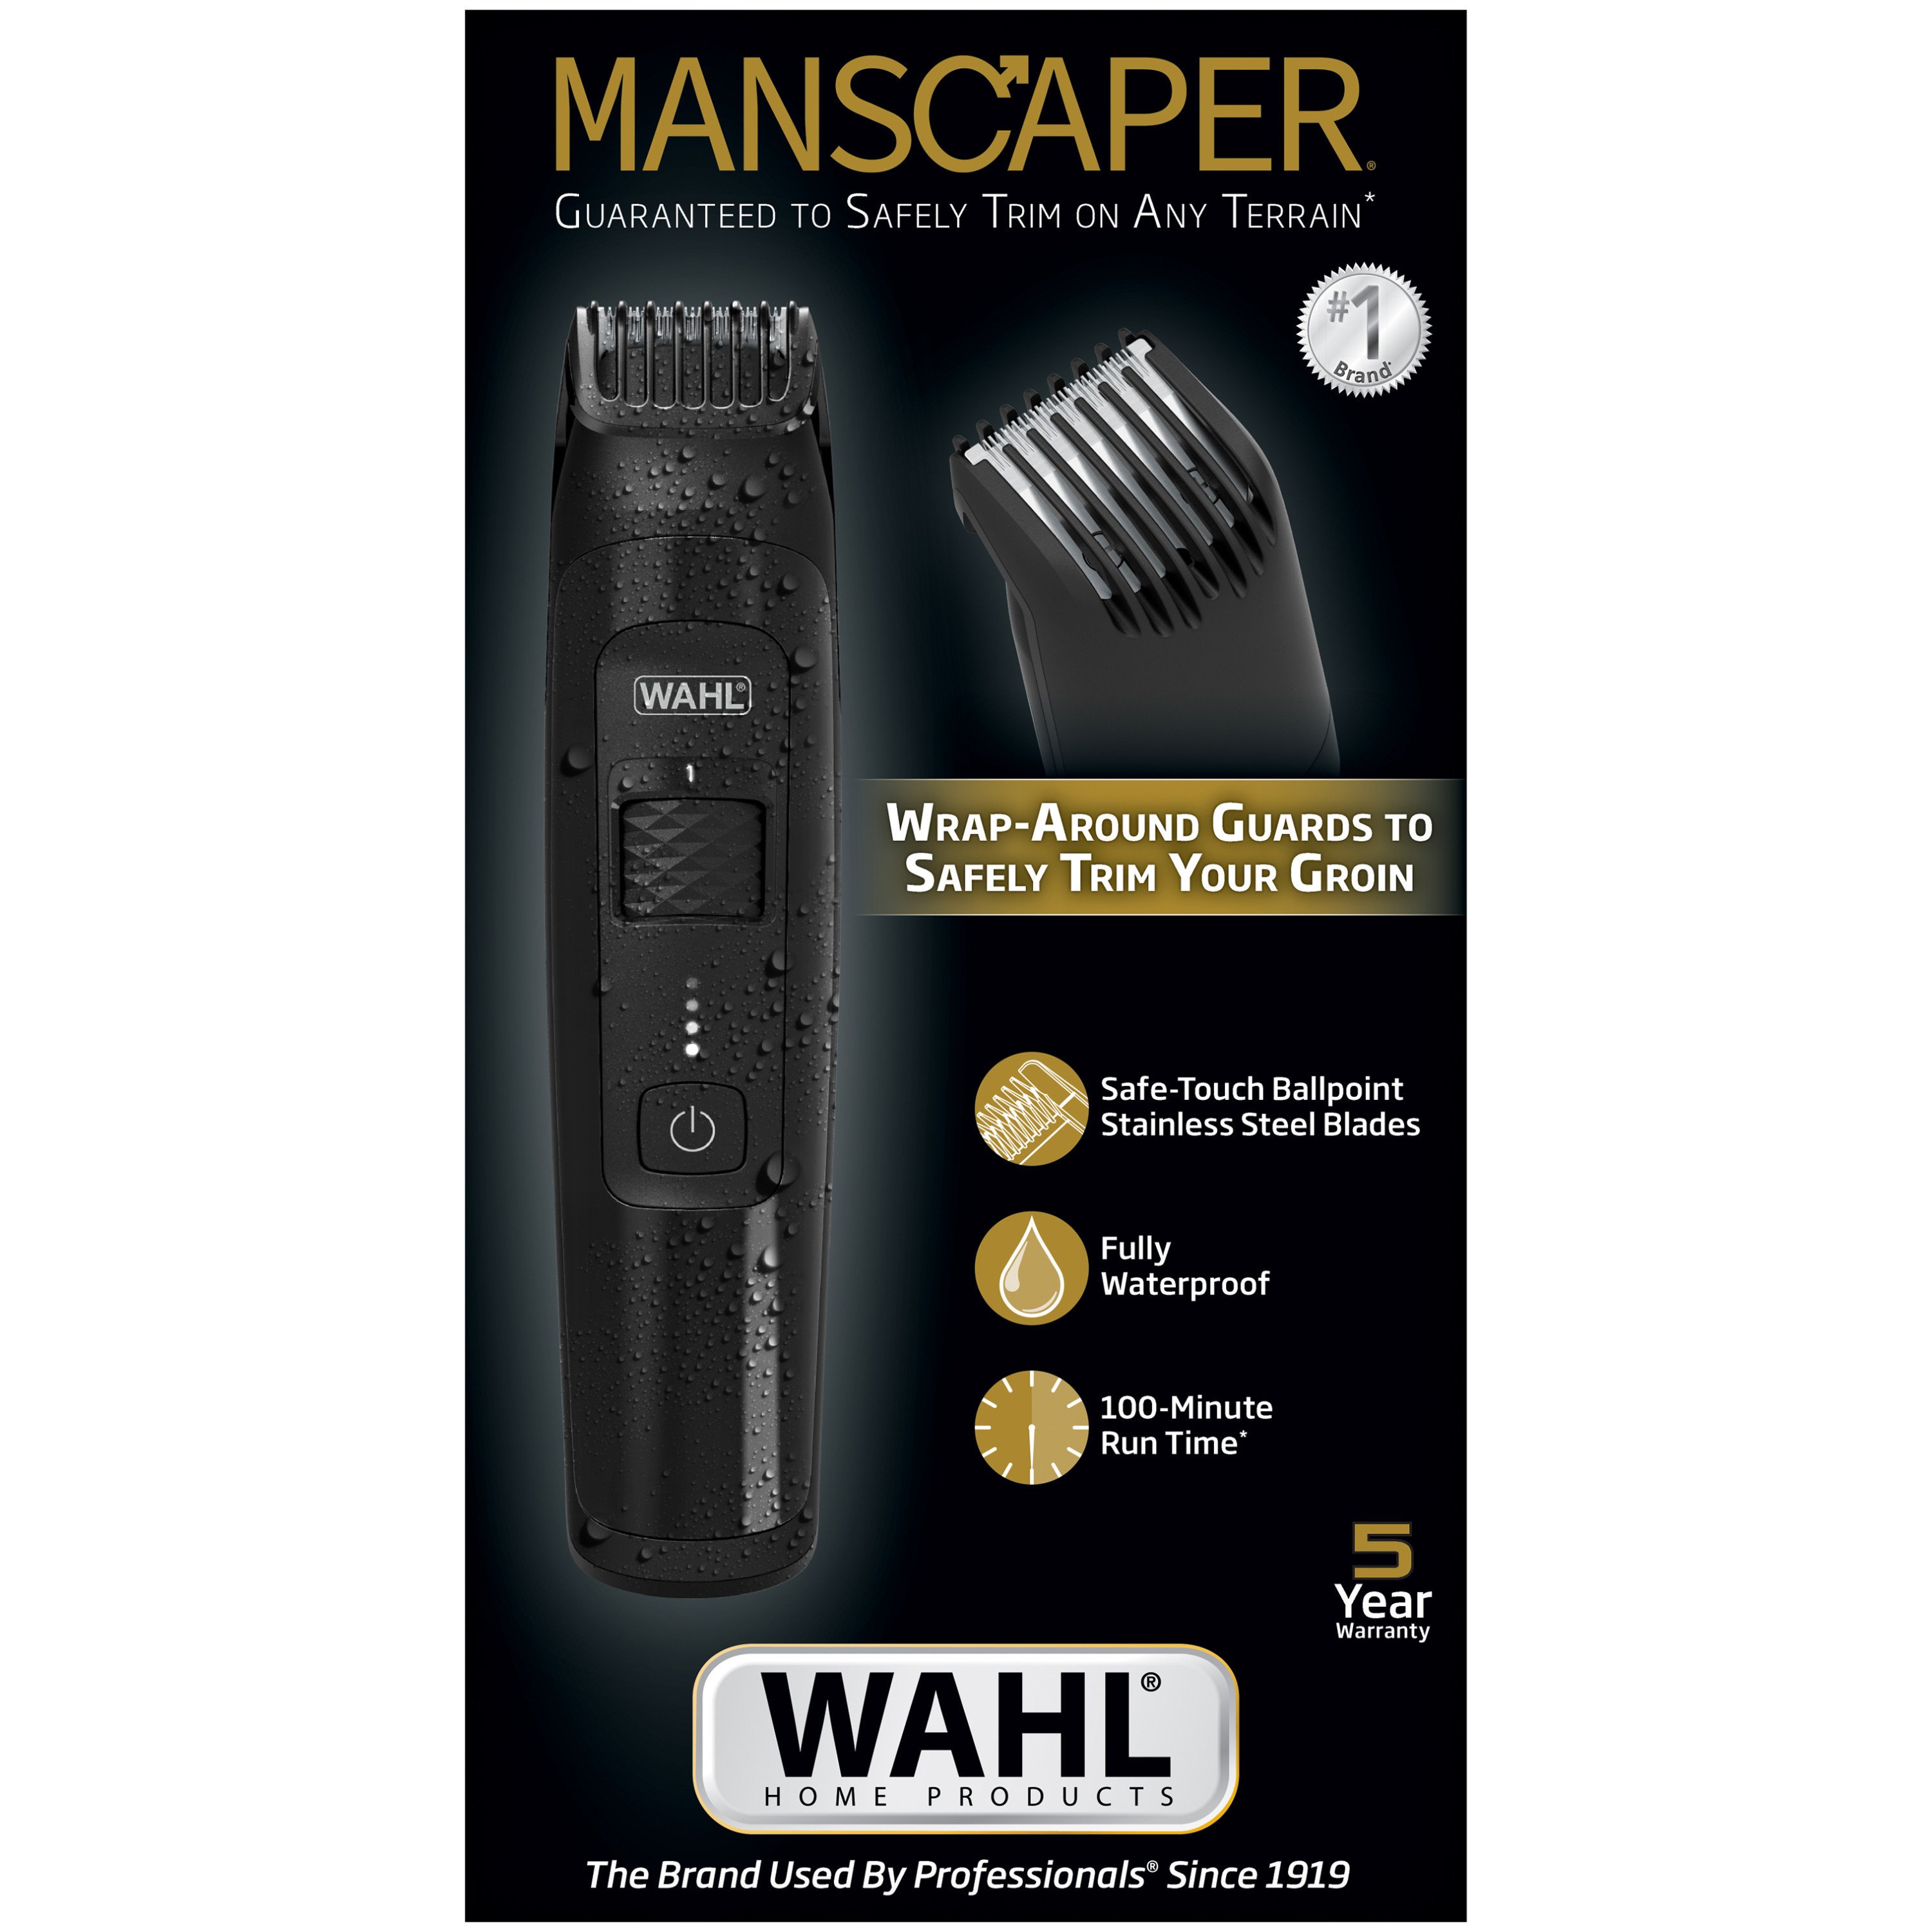 Manscaper Grooming Kit - Shop Electric Shavers & Trimmers at